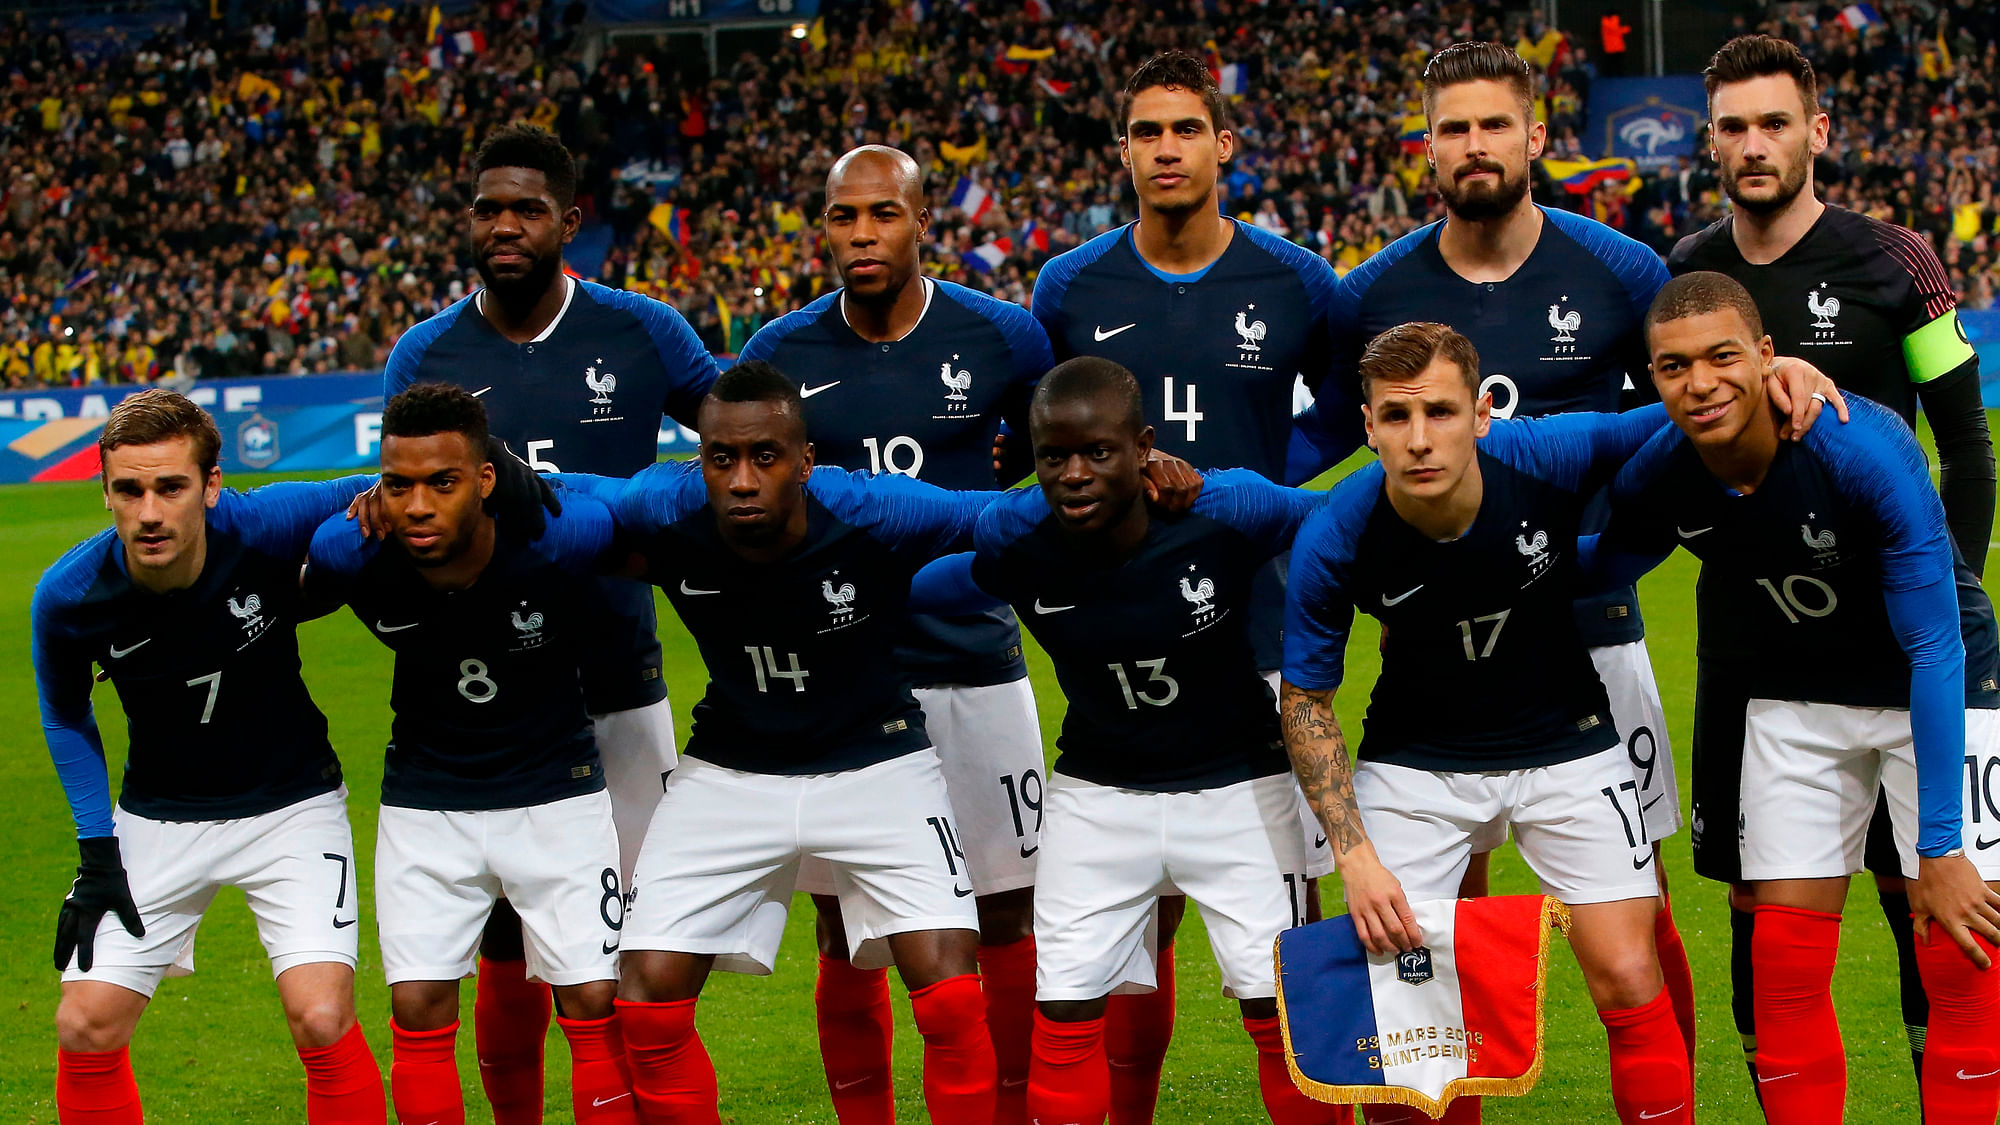 In this photo taken on Friday March 23, 2018 the French national soccer team poses before a friendly soccer match between France and Colombia in Saint-Denis, outside Paris.